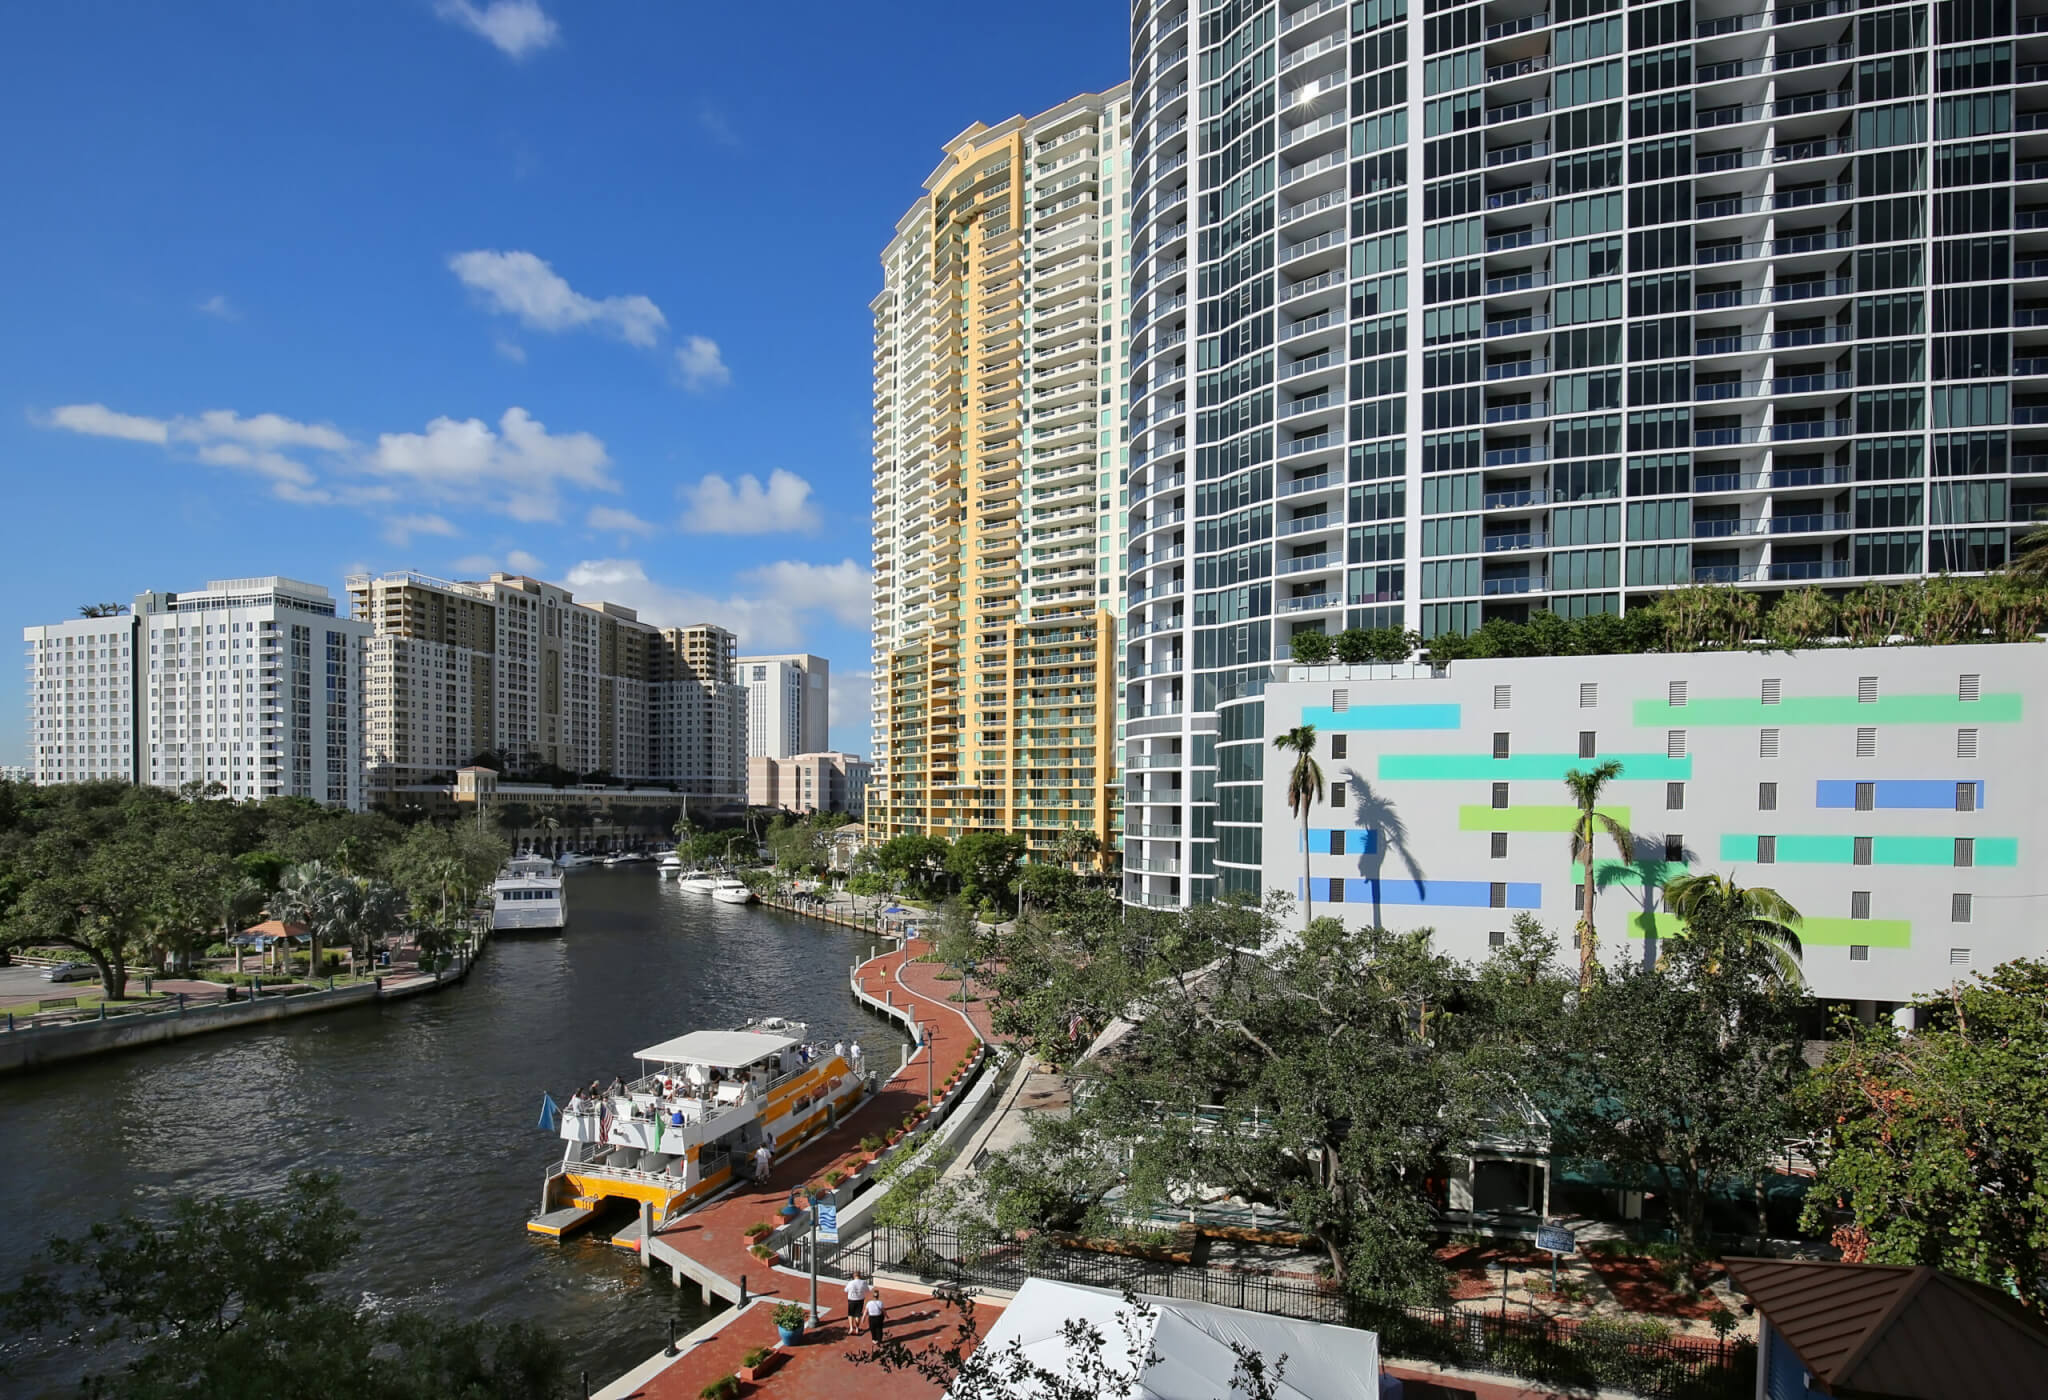 Aerial view of Fort Lauderdale's Riverfront, bustling with boating activity and lined with high rise condos and apartments located in the heart of downtown Fort Lauderdale.